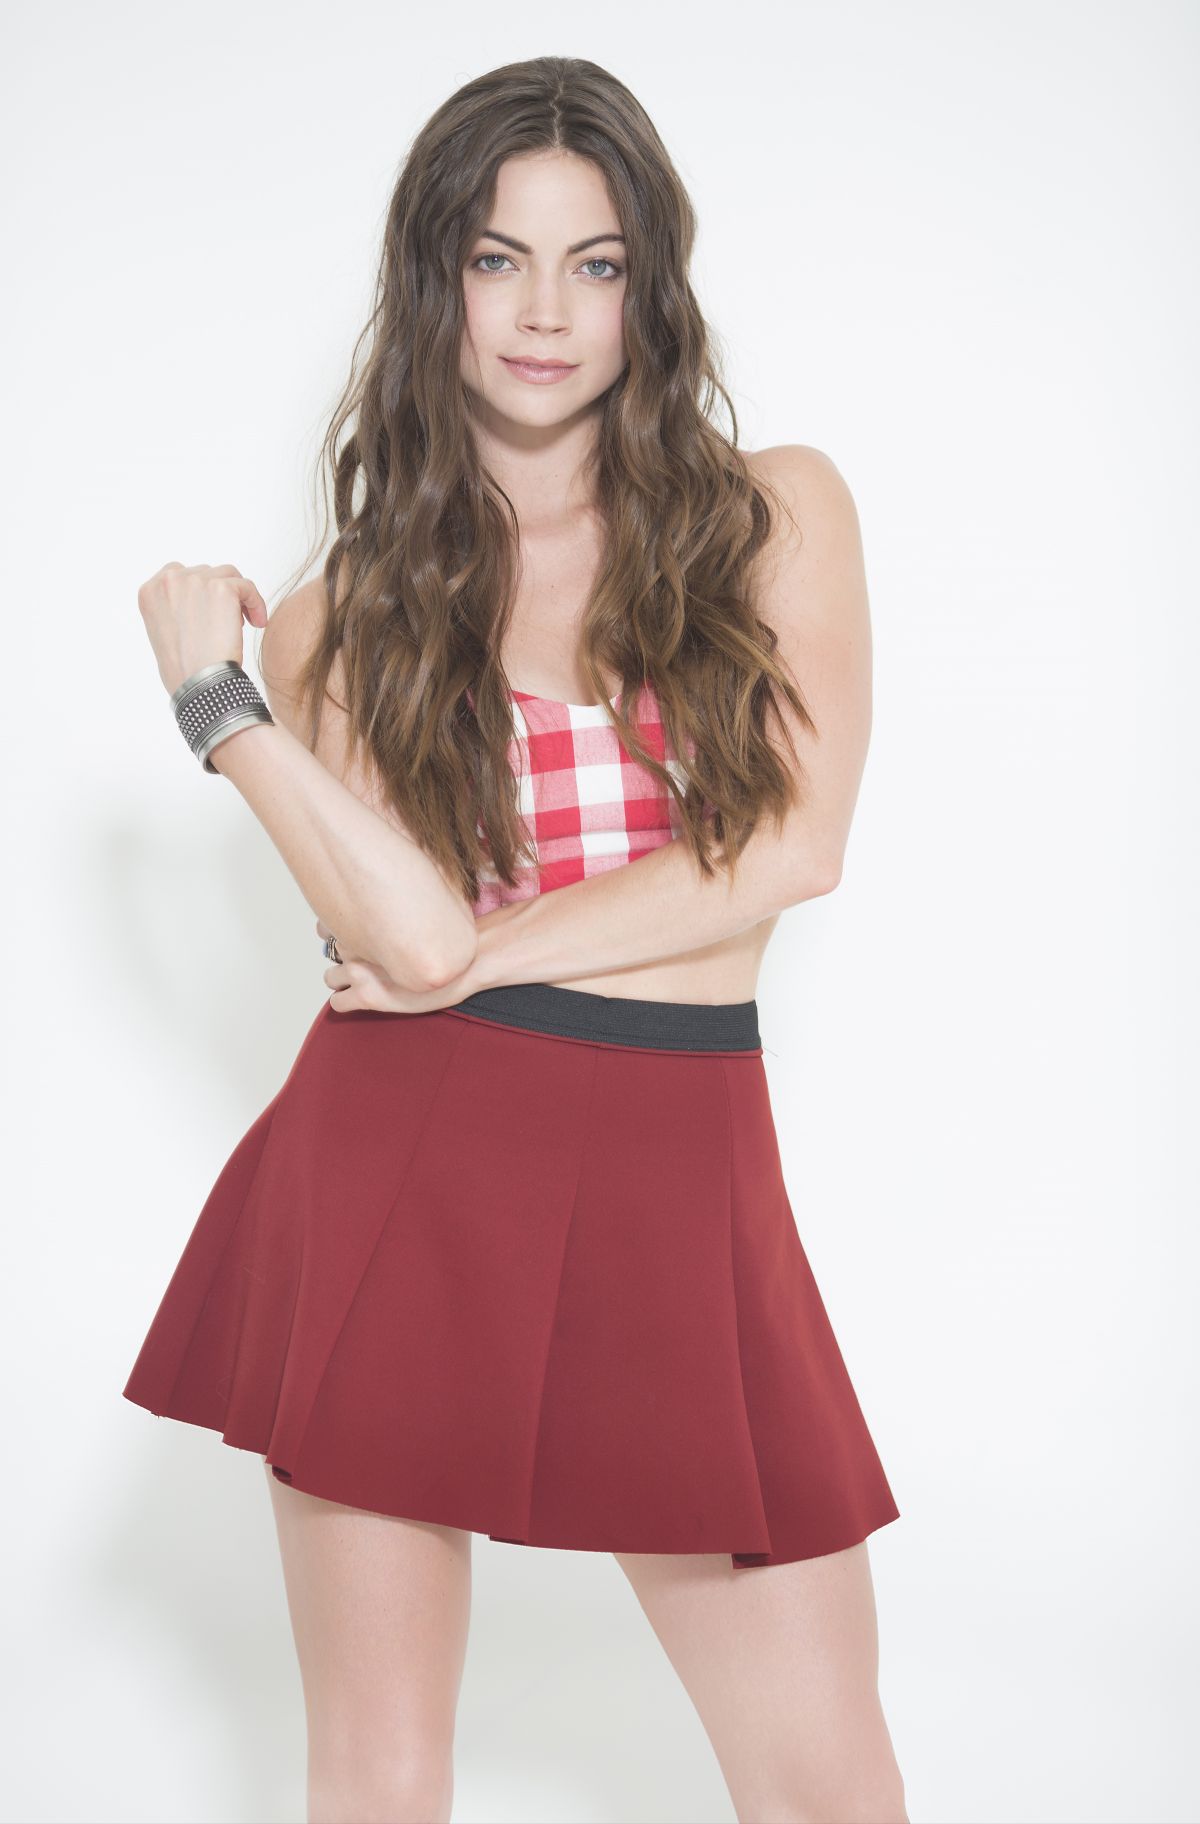 CAITLIN CARVER at a Photoshoot, May 2014.